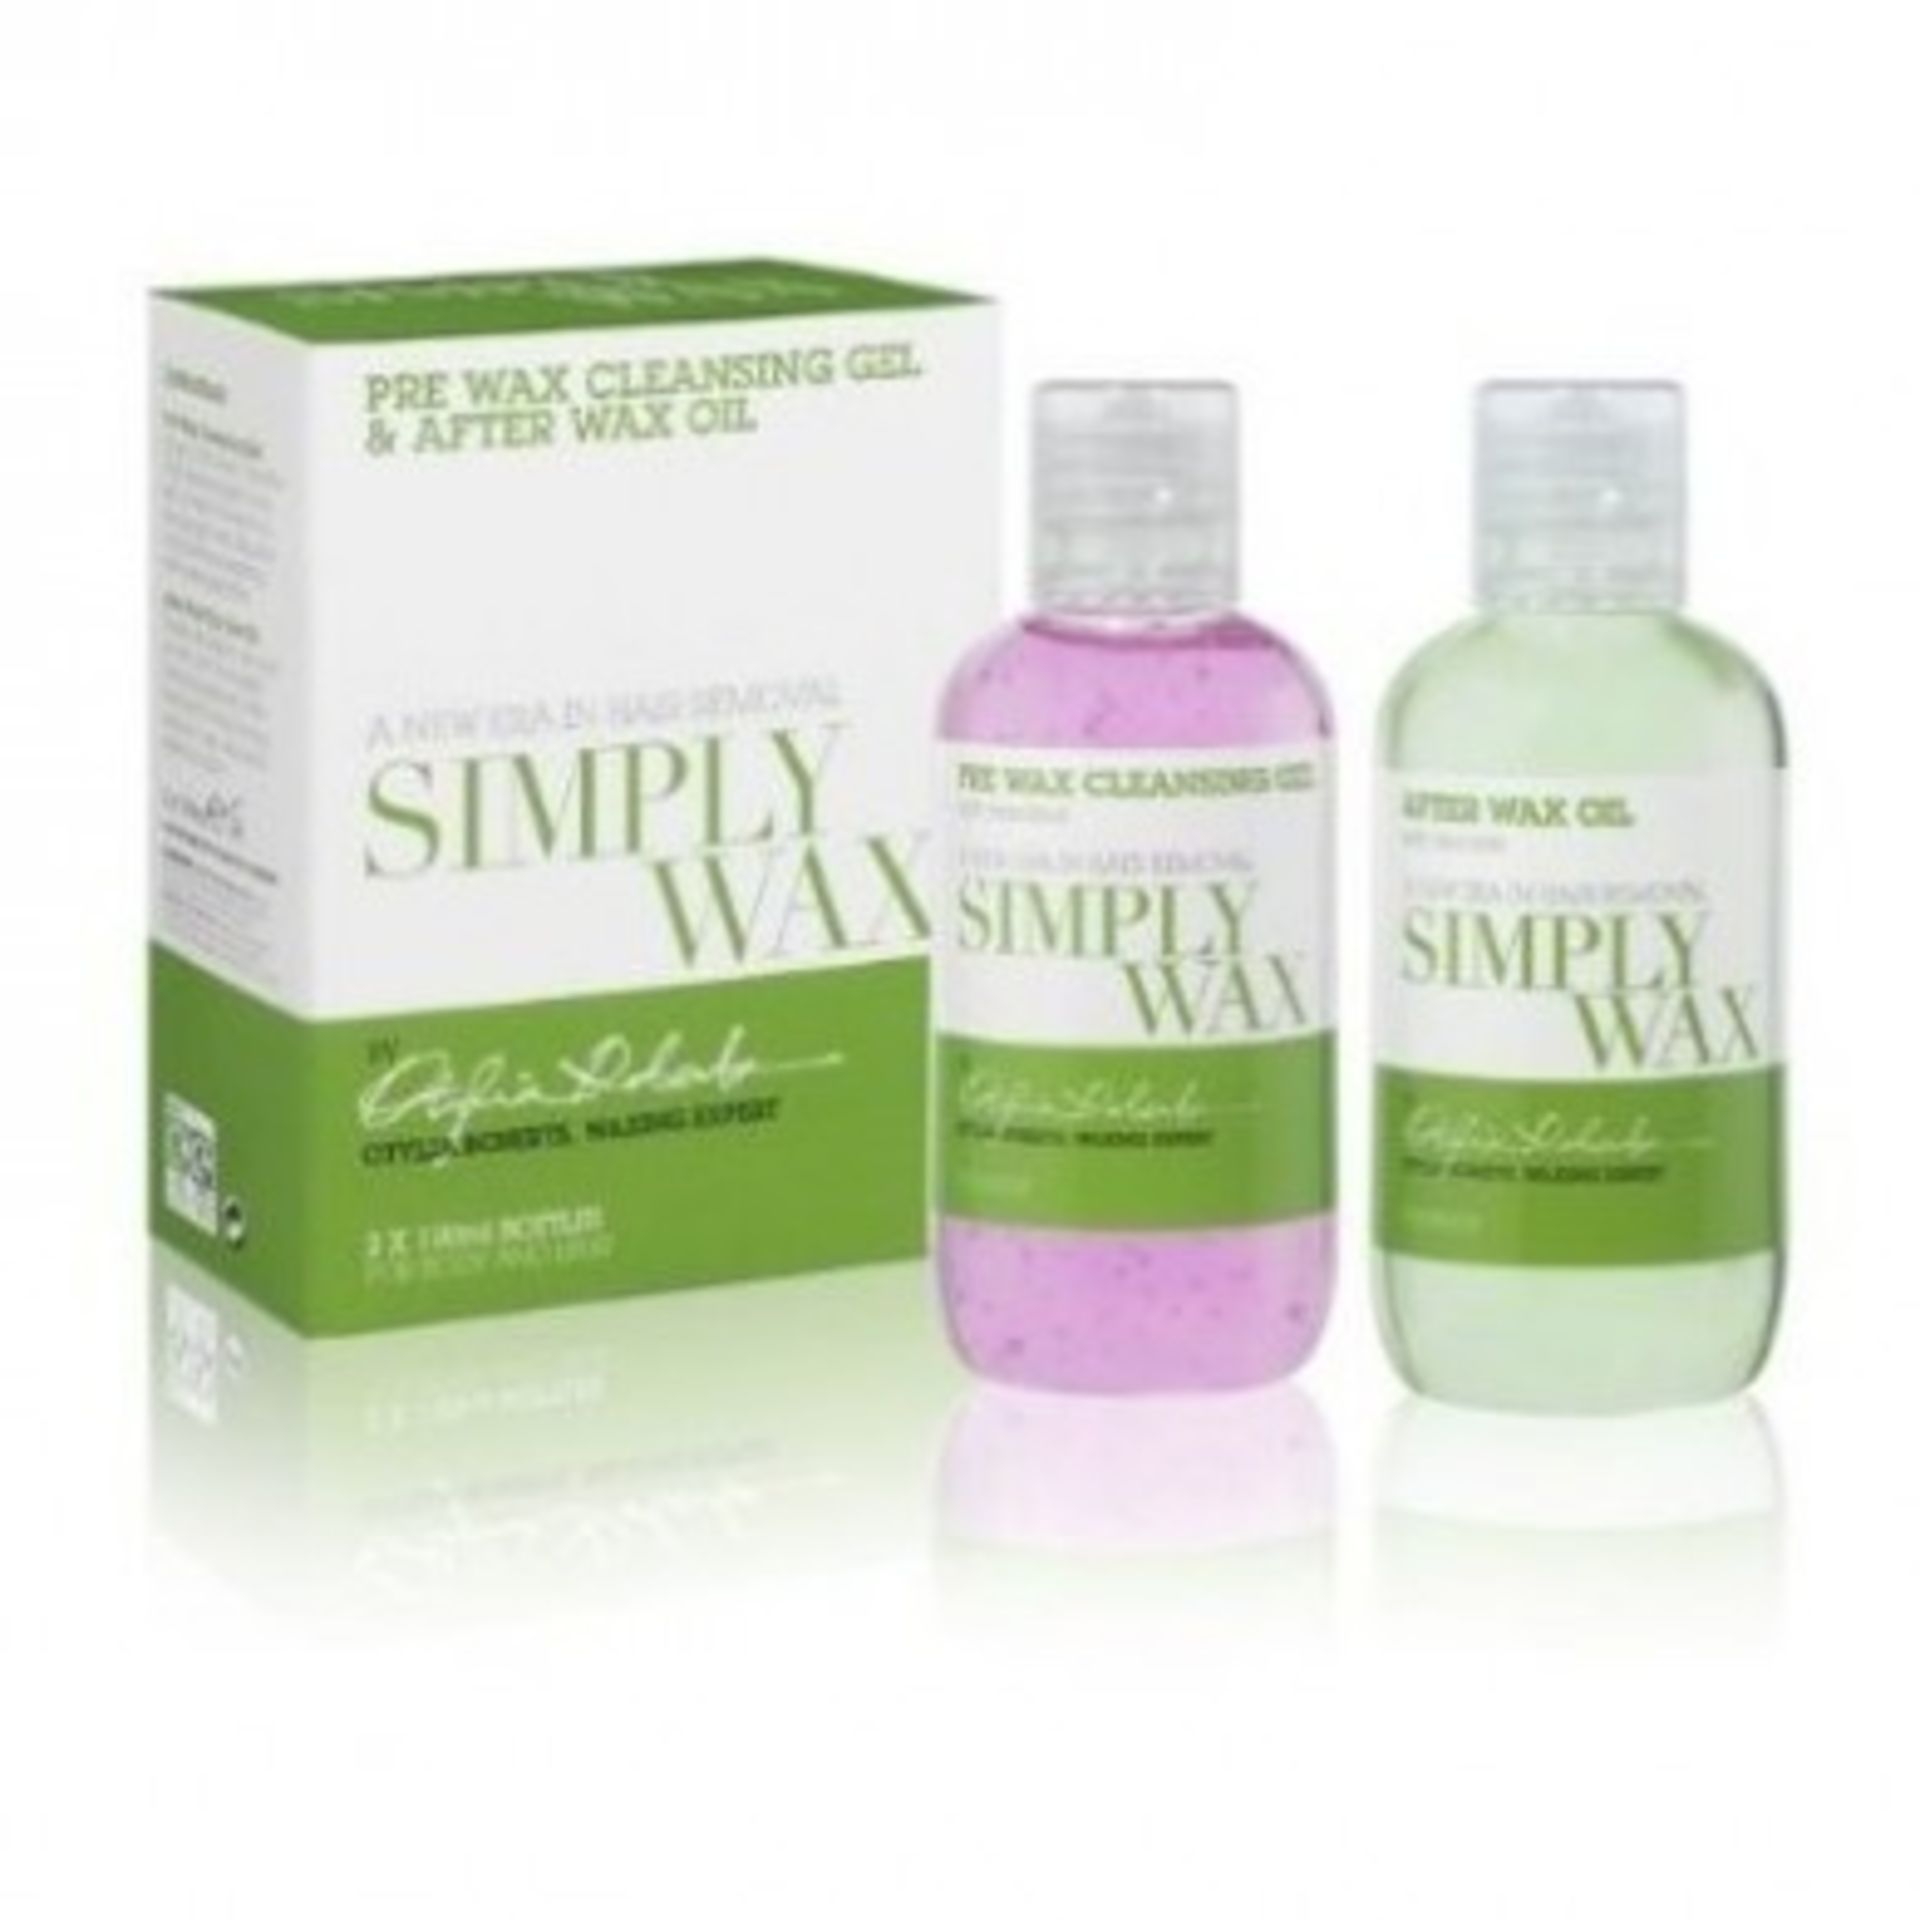 100 x Simply Was Sets – Pre wax cleansing gel and wax oil- 2 x 100ml set – NO VAT – UK Delivery £40